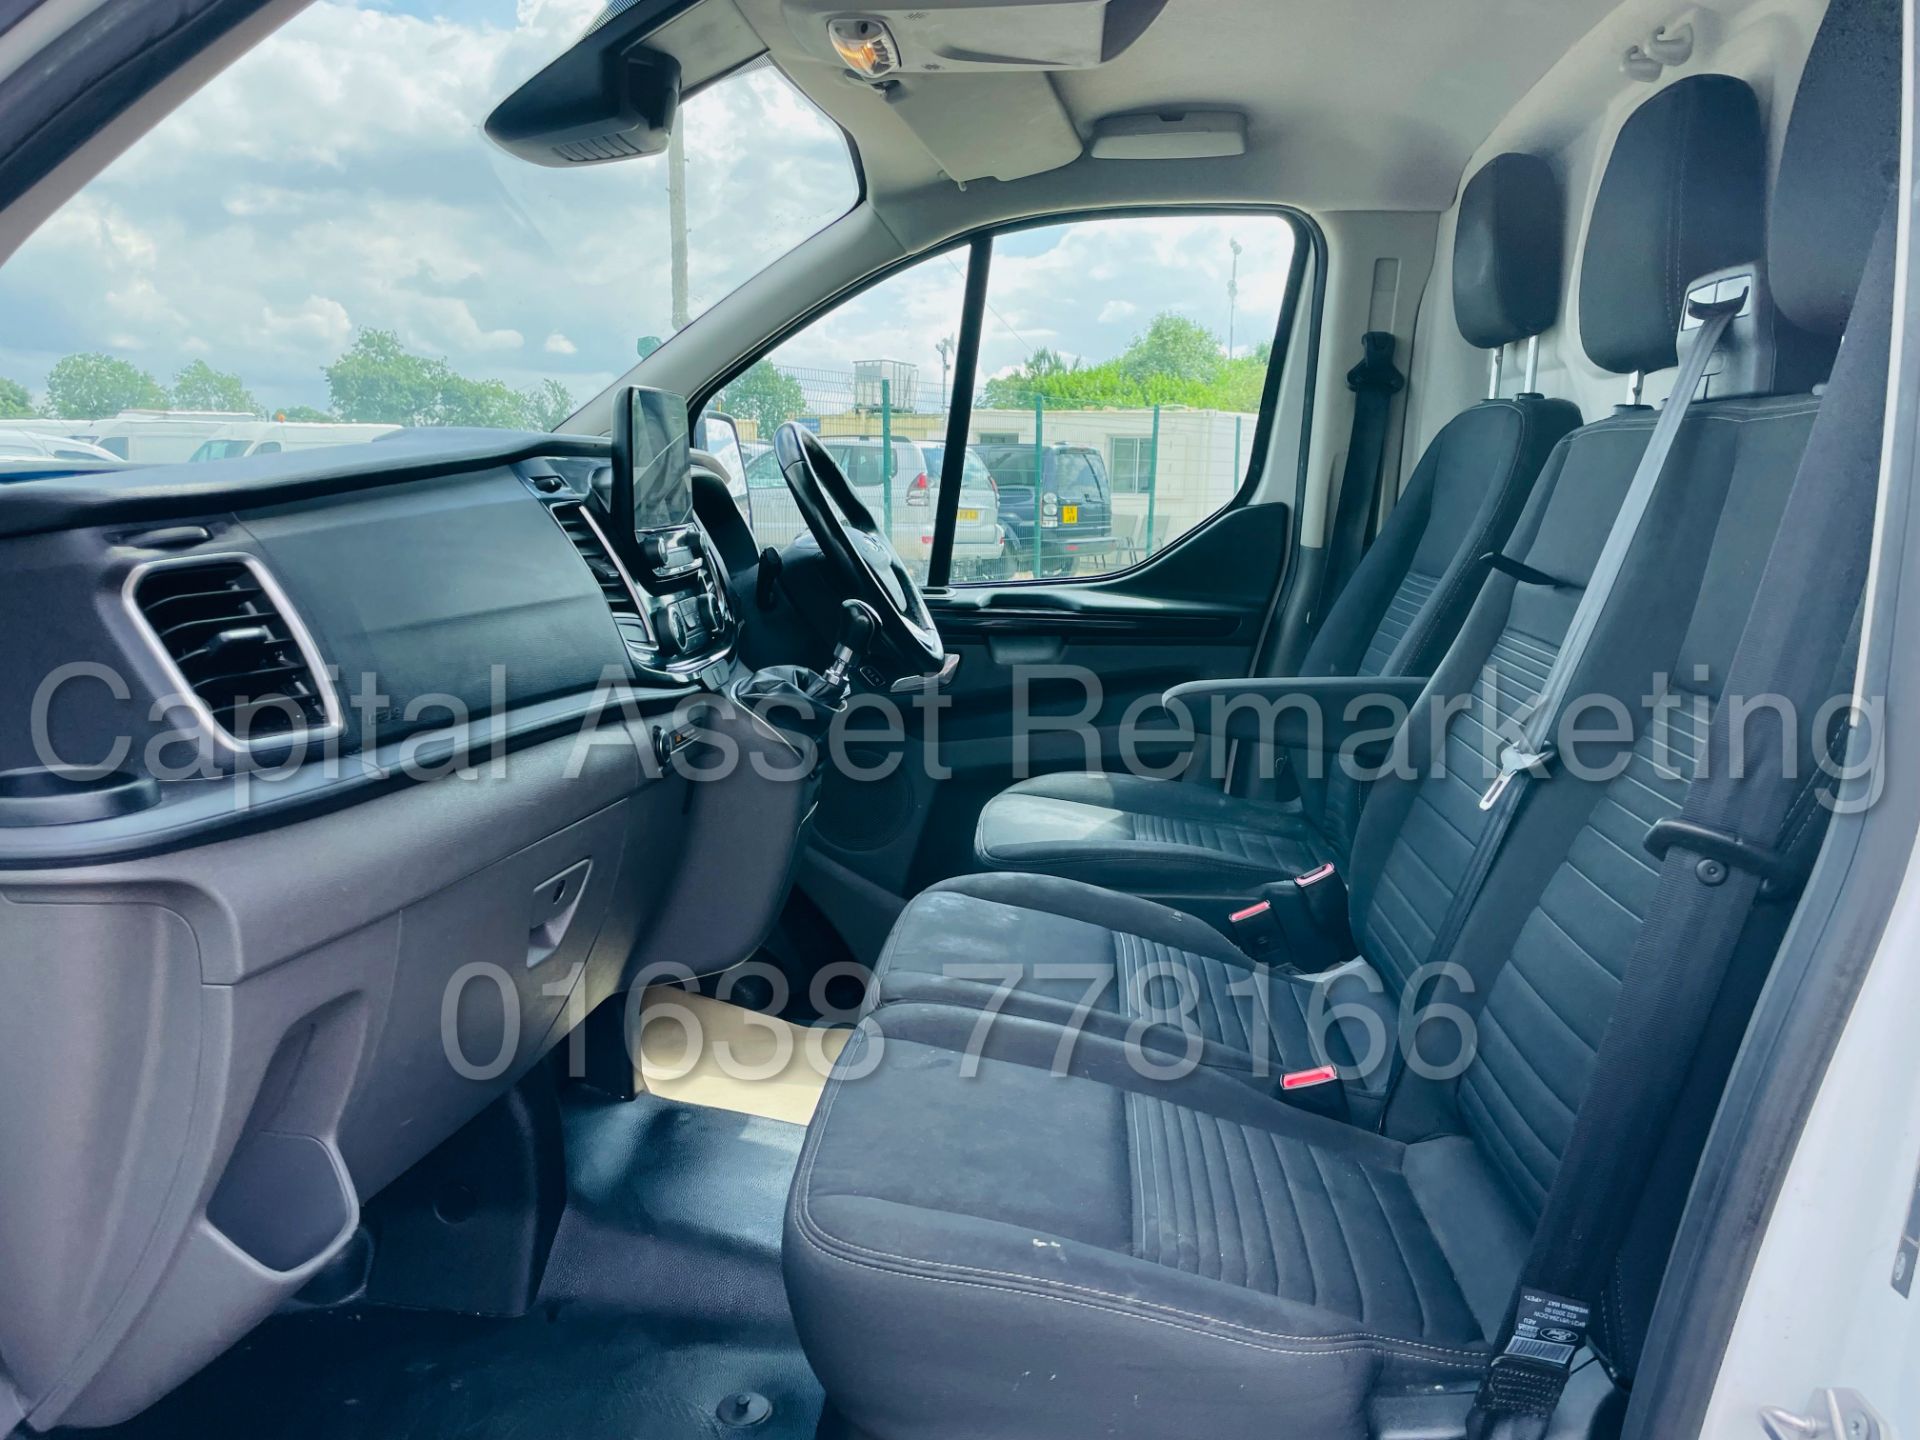 FORD TRANSIT CUSTOM *LIMITED EDITION* PANEL VAN (2018 - NEW MODEL) '2.0 TDCI - EURO 6 - 6 SPEED' - Image 25 of 46